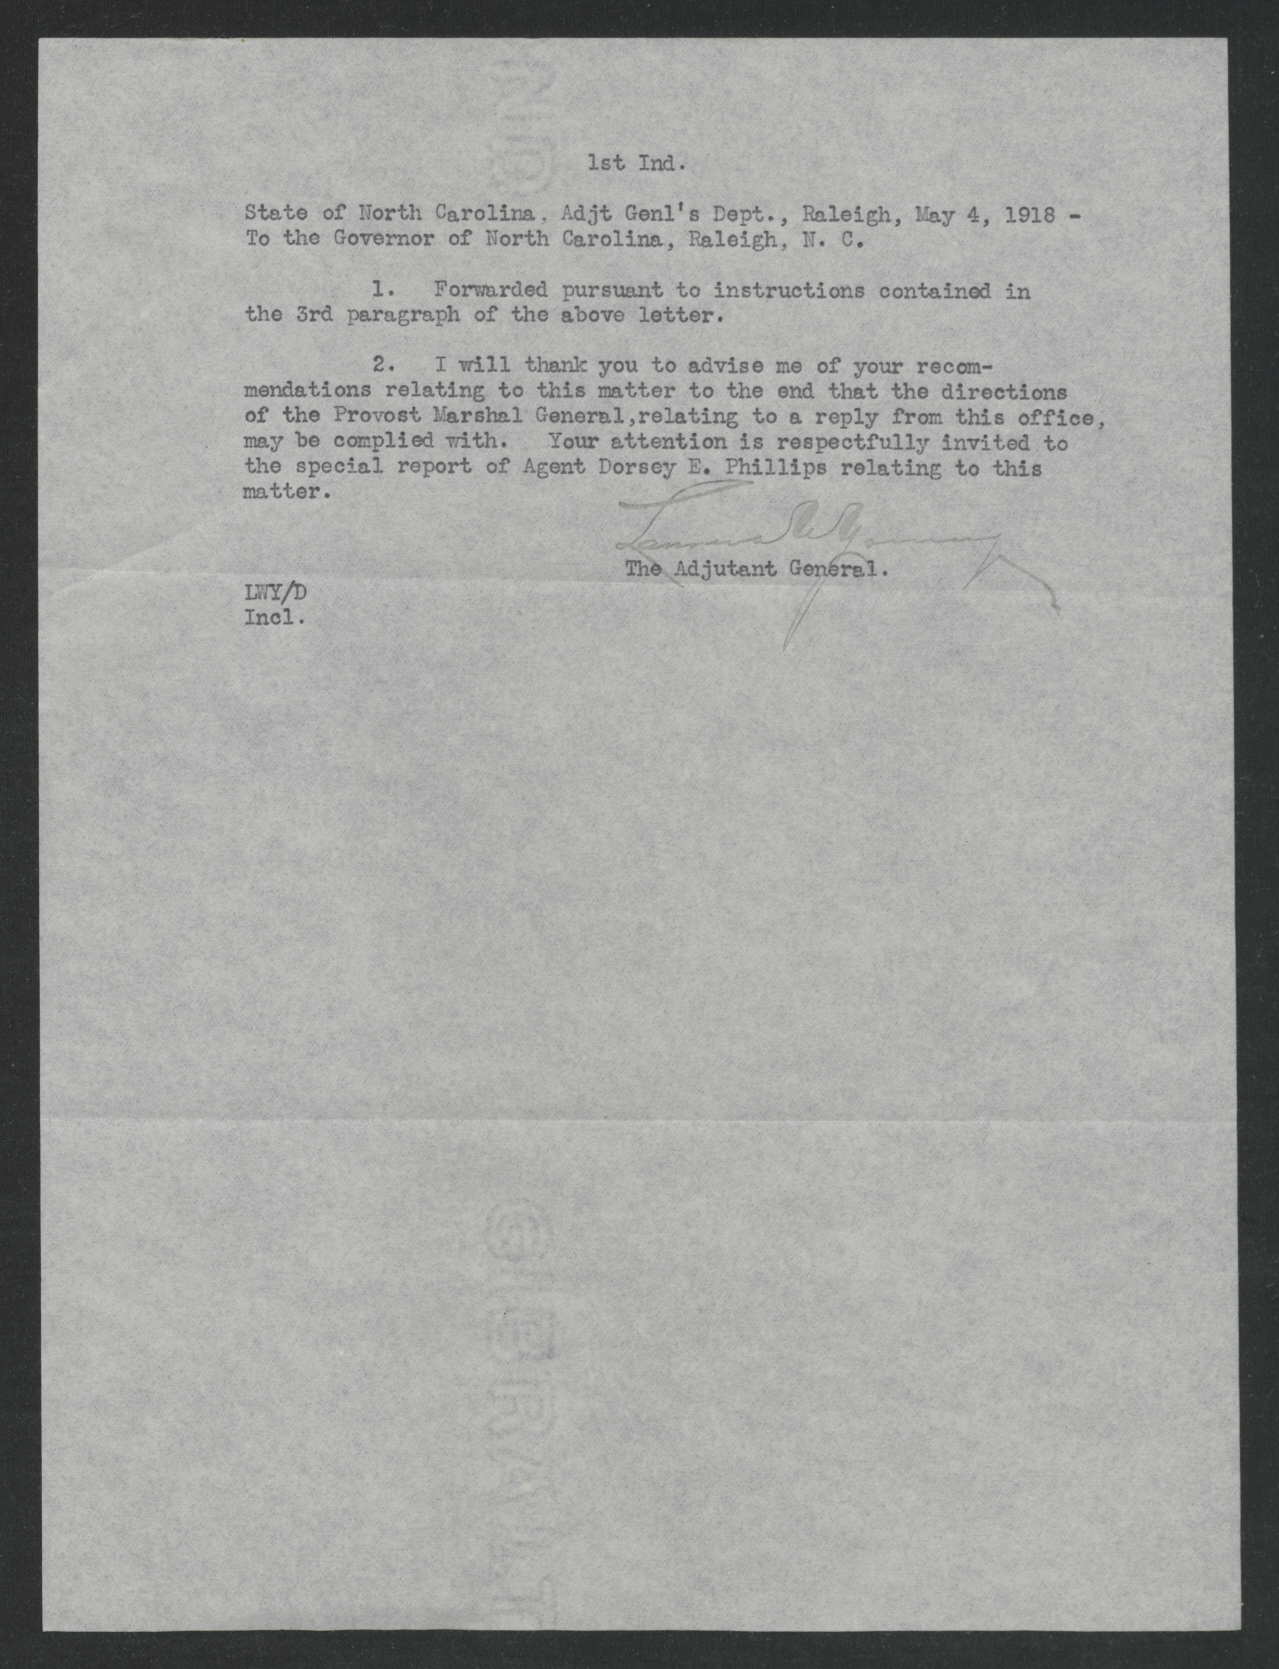 Letter from Laurence W. Young to Thomas W. Bickett, May 4, 1918